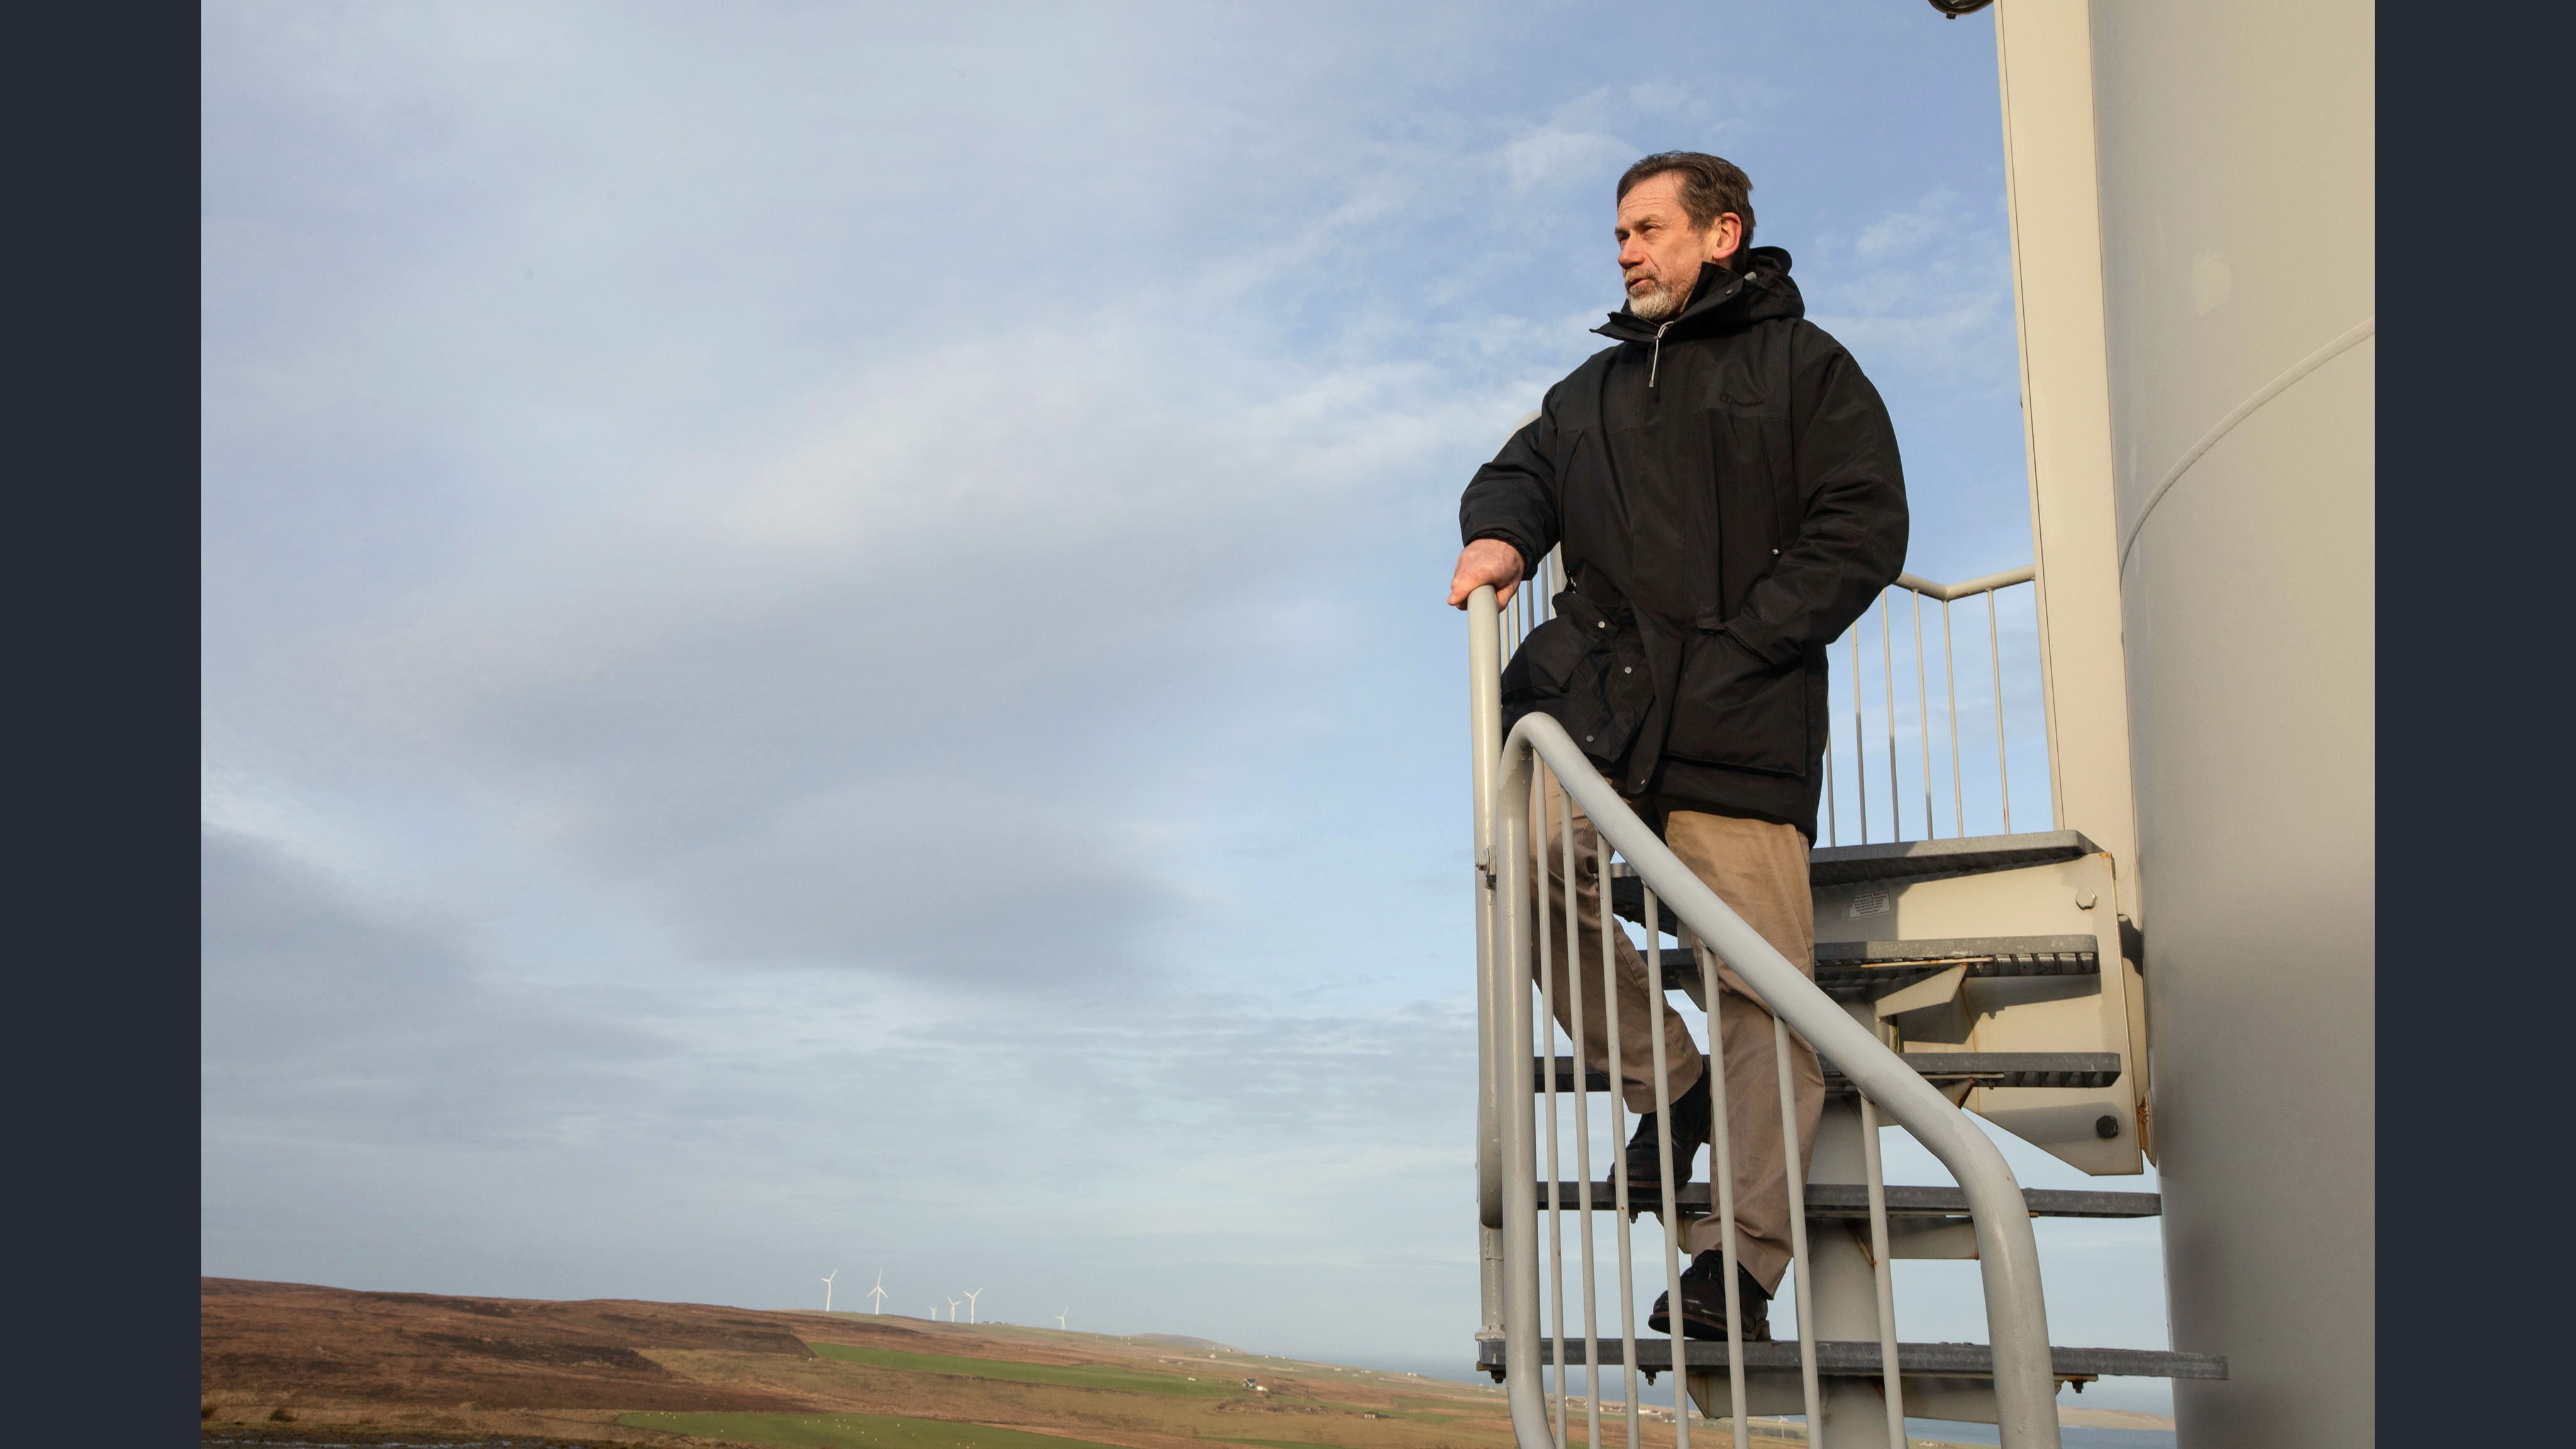 Richard Gauld, Technical Director of Hammers Hill Energy Ltd, checking on a wind turbine